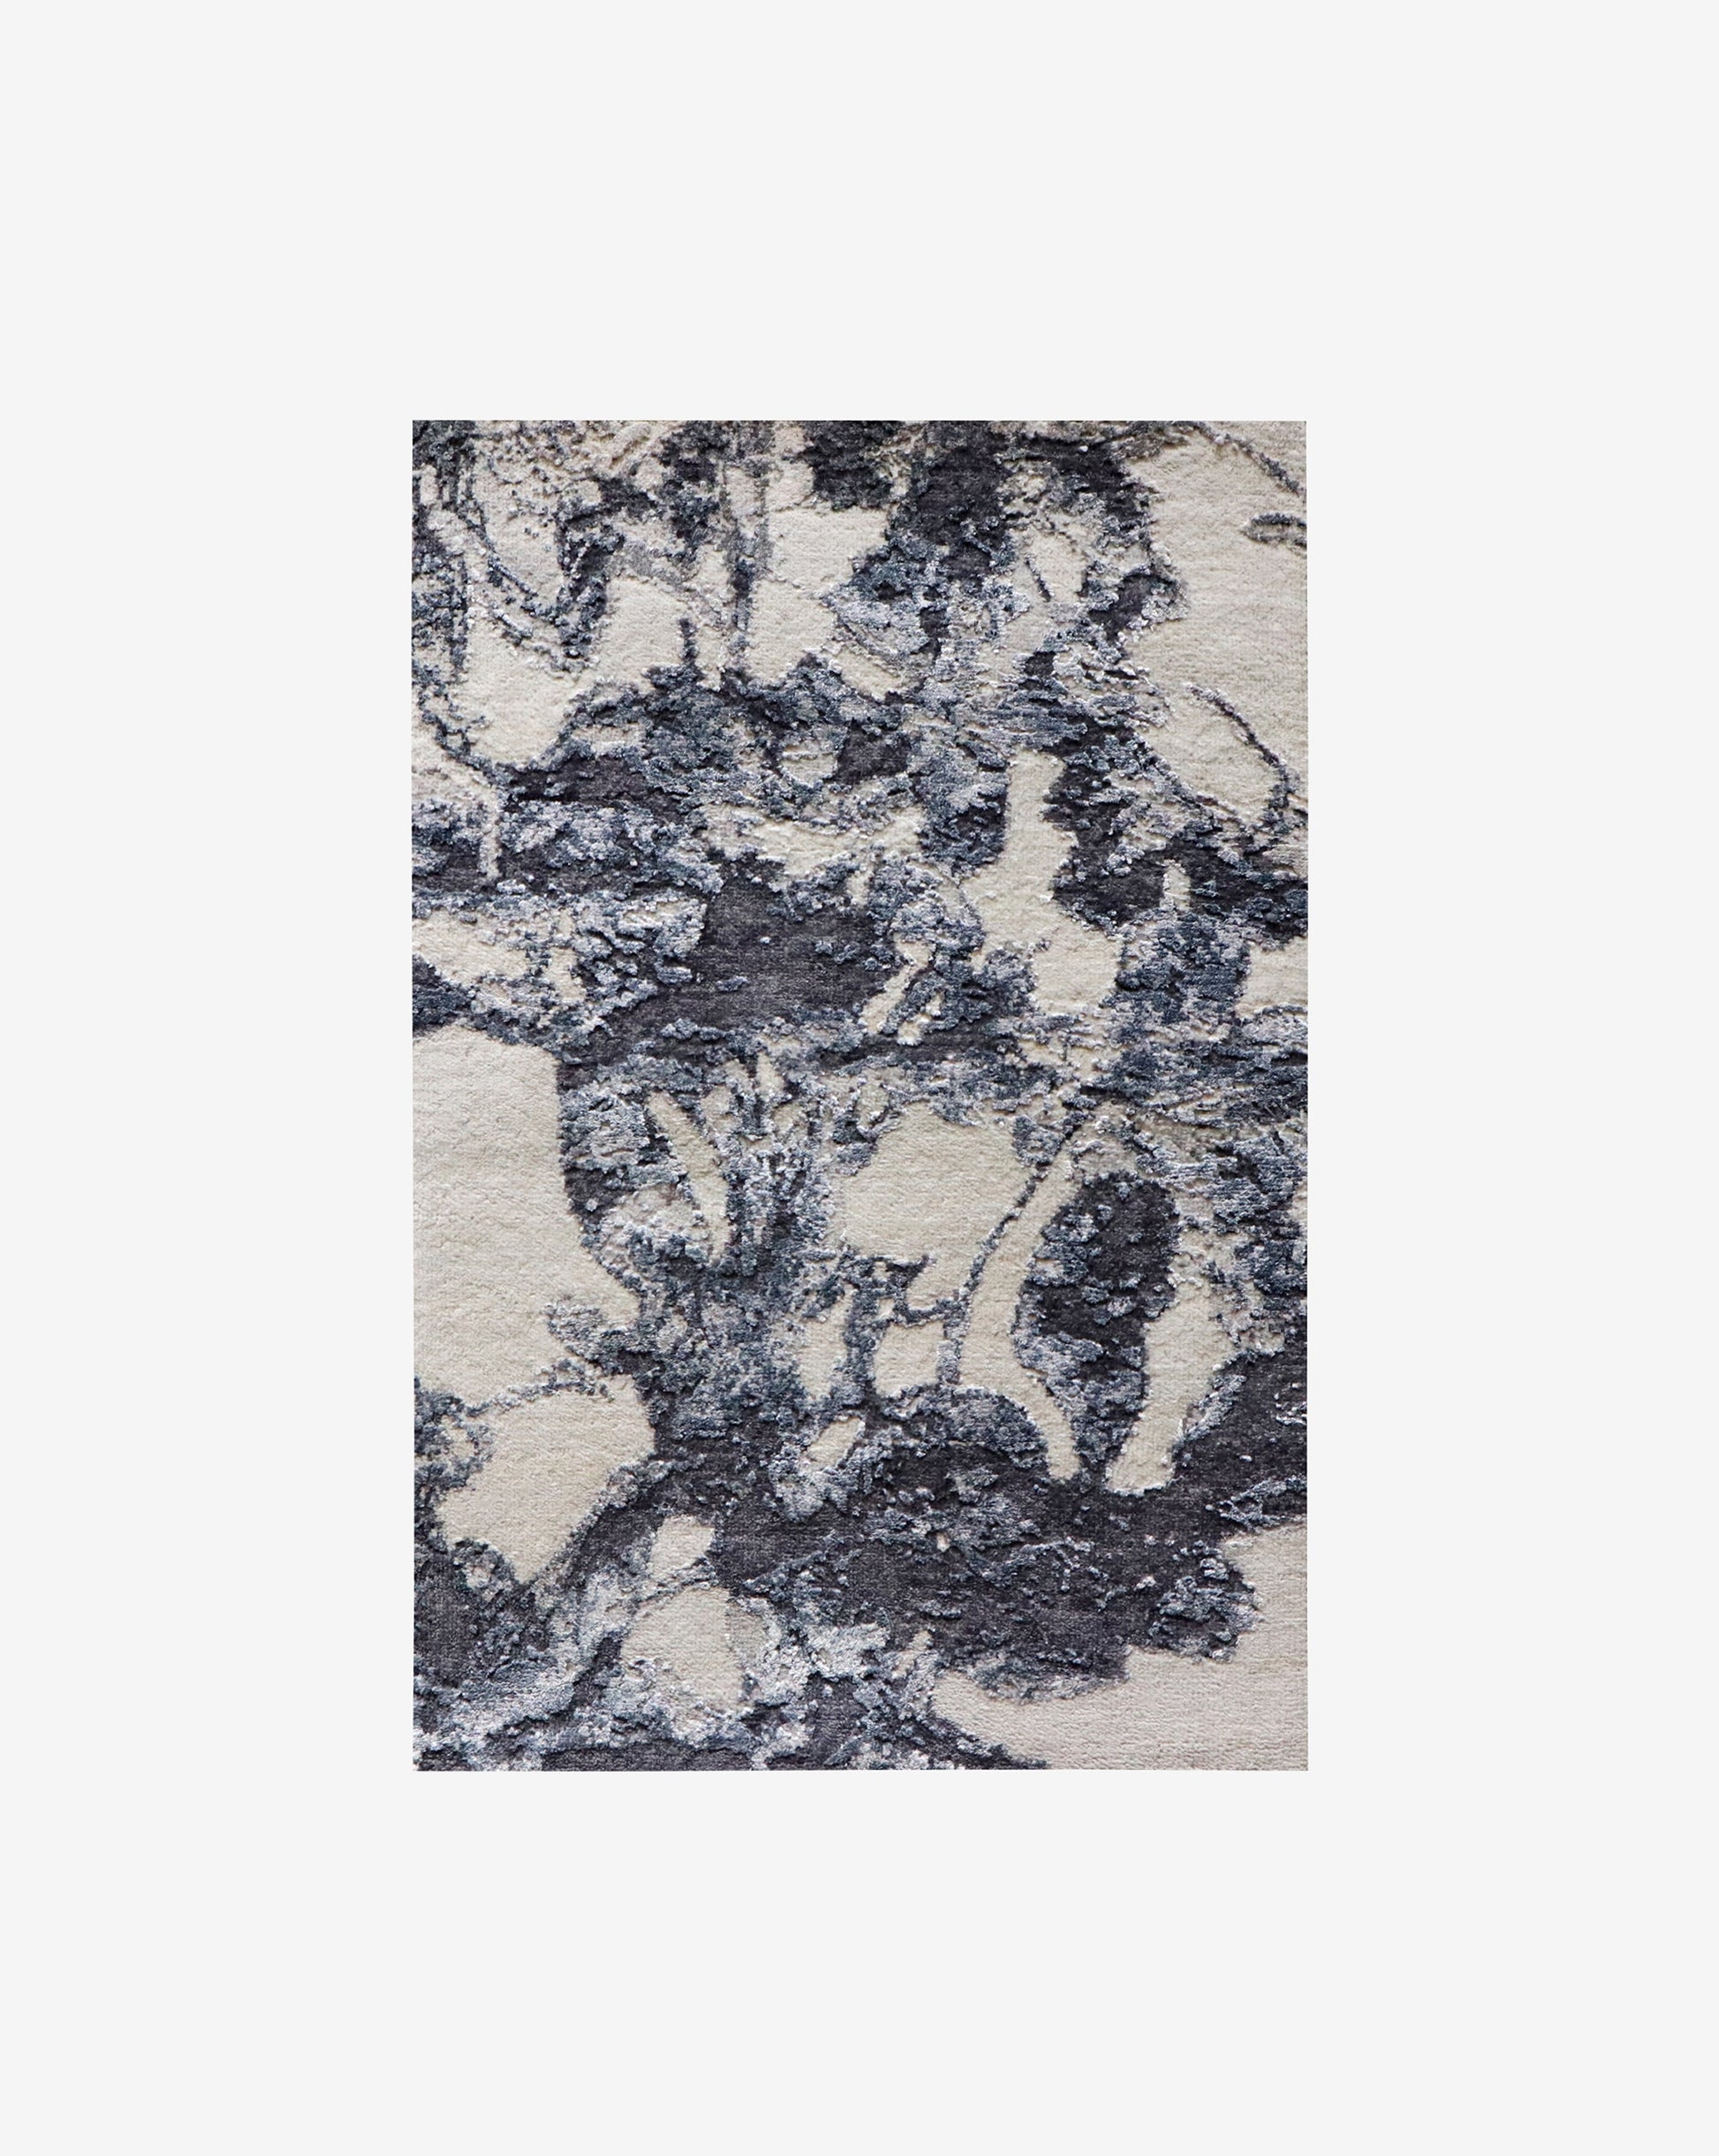 A black and white Up For Anything Persian Knot Rug 2' x 3' Olive, made from silk and wool materials, featuring an abstract botanical pattern